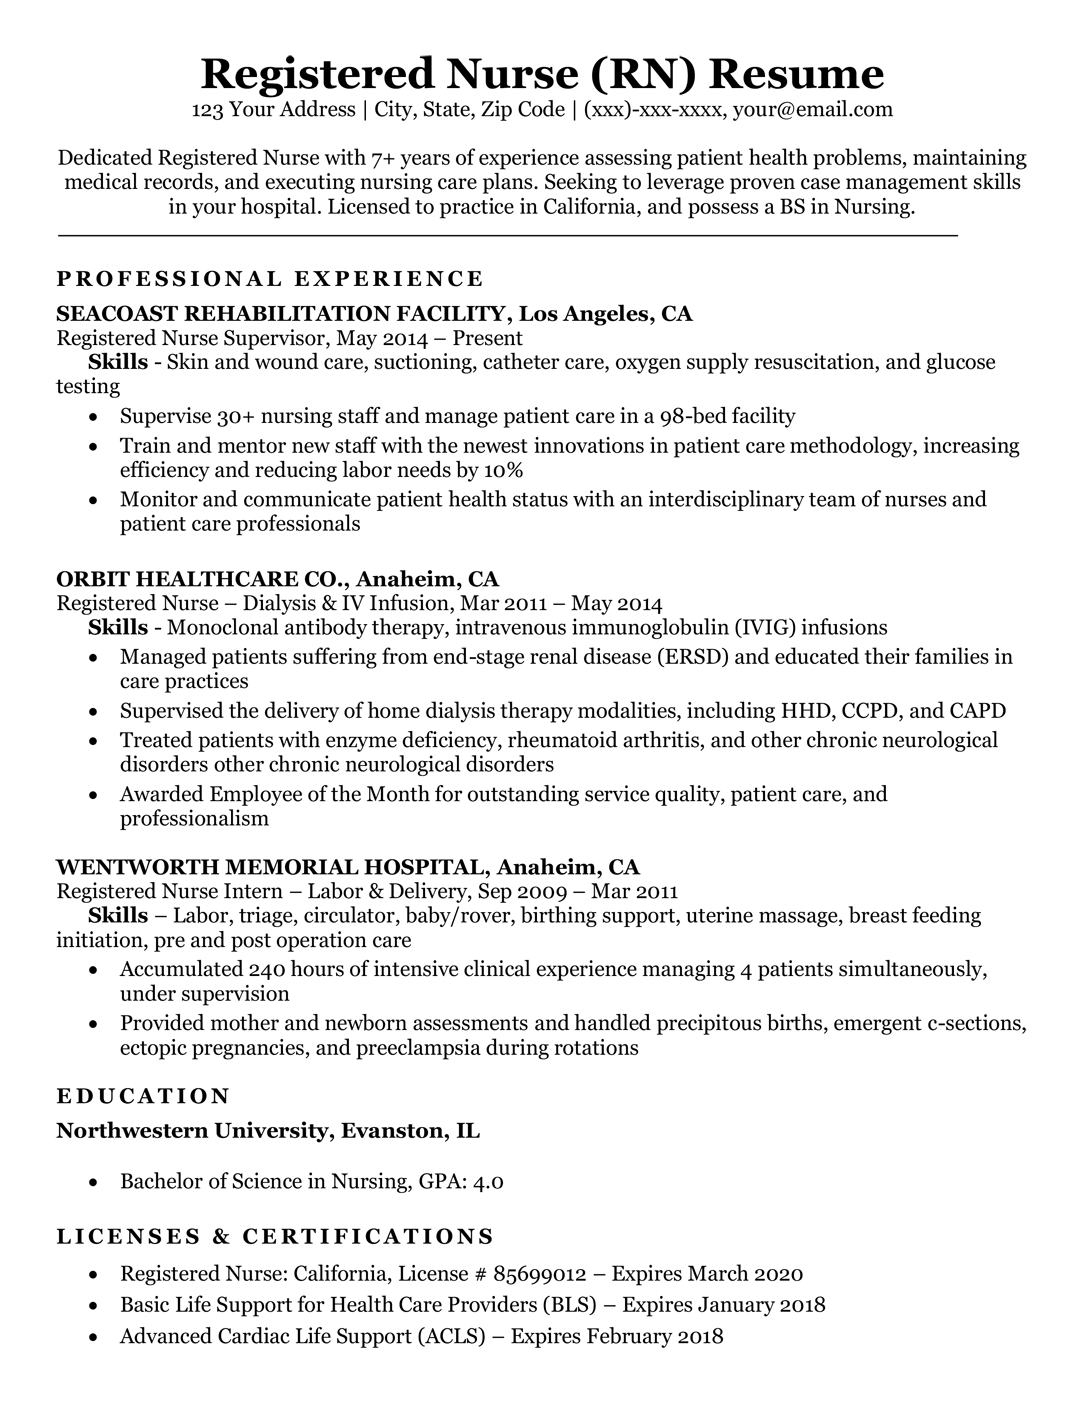 Proposal and dissertation help